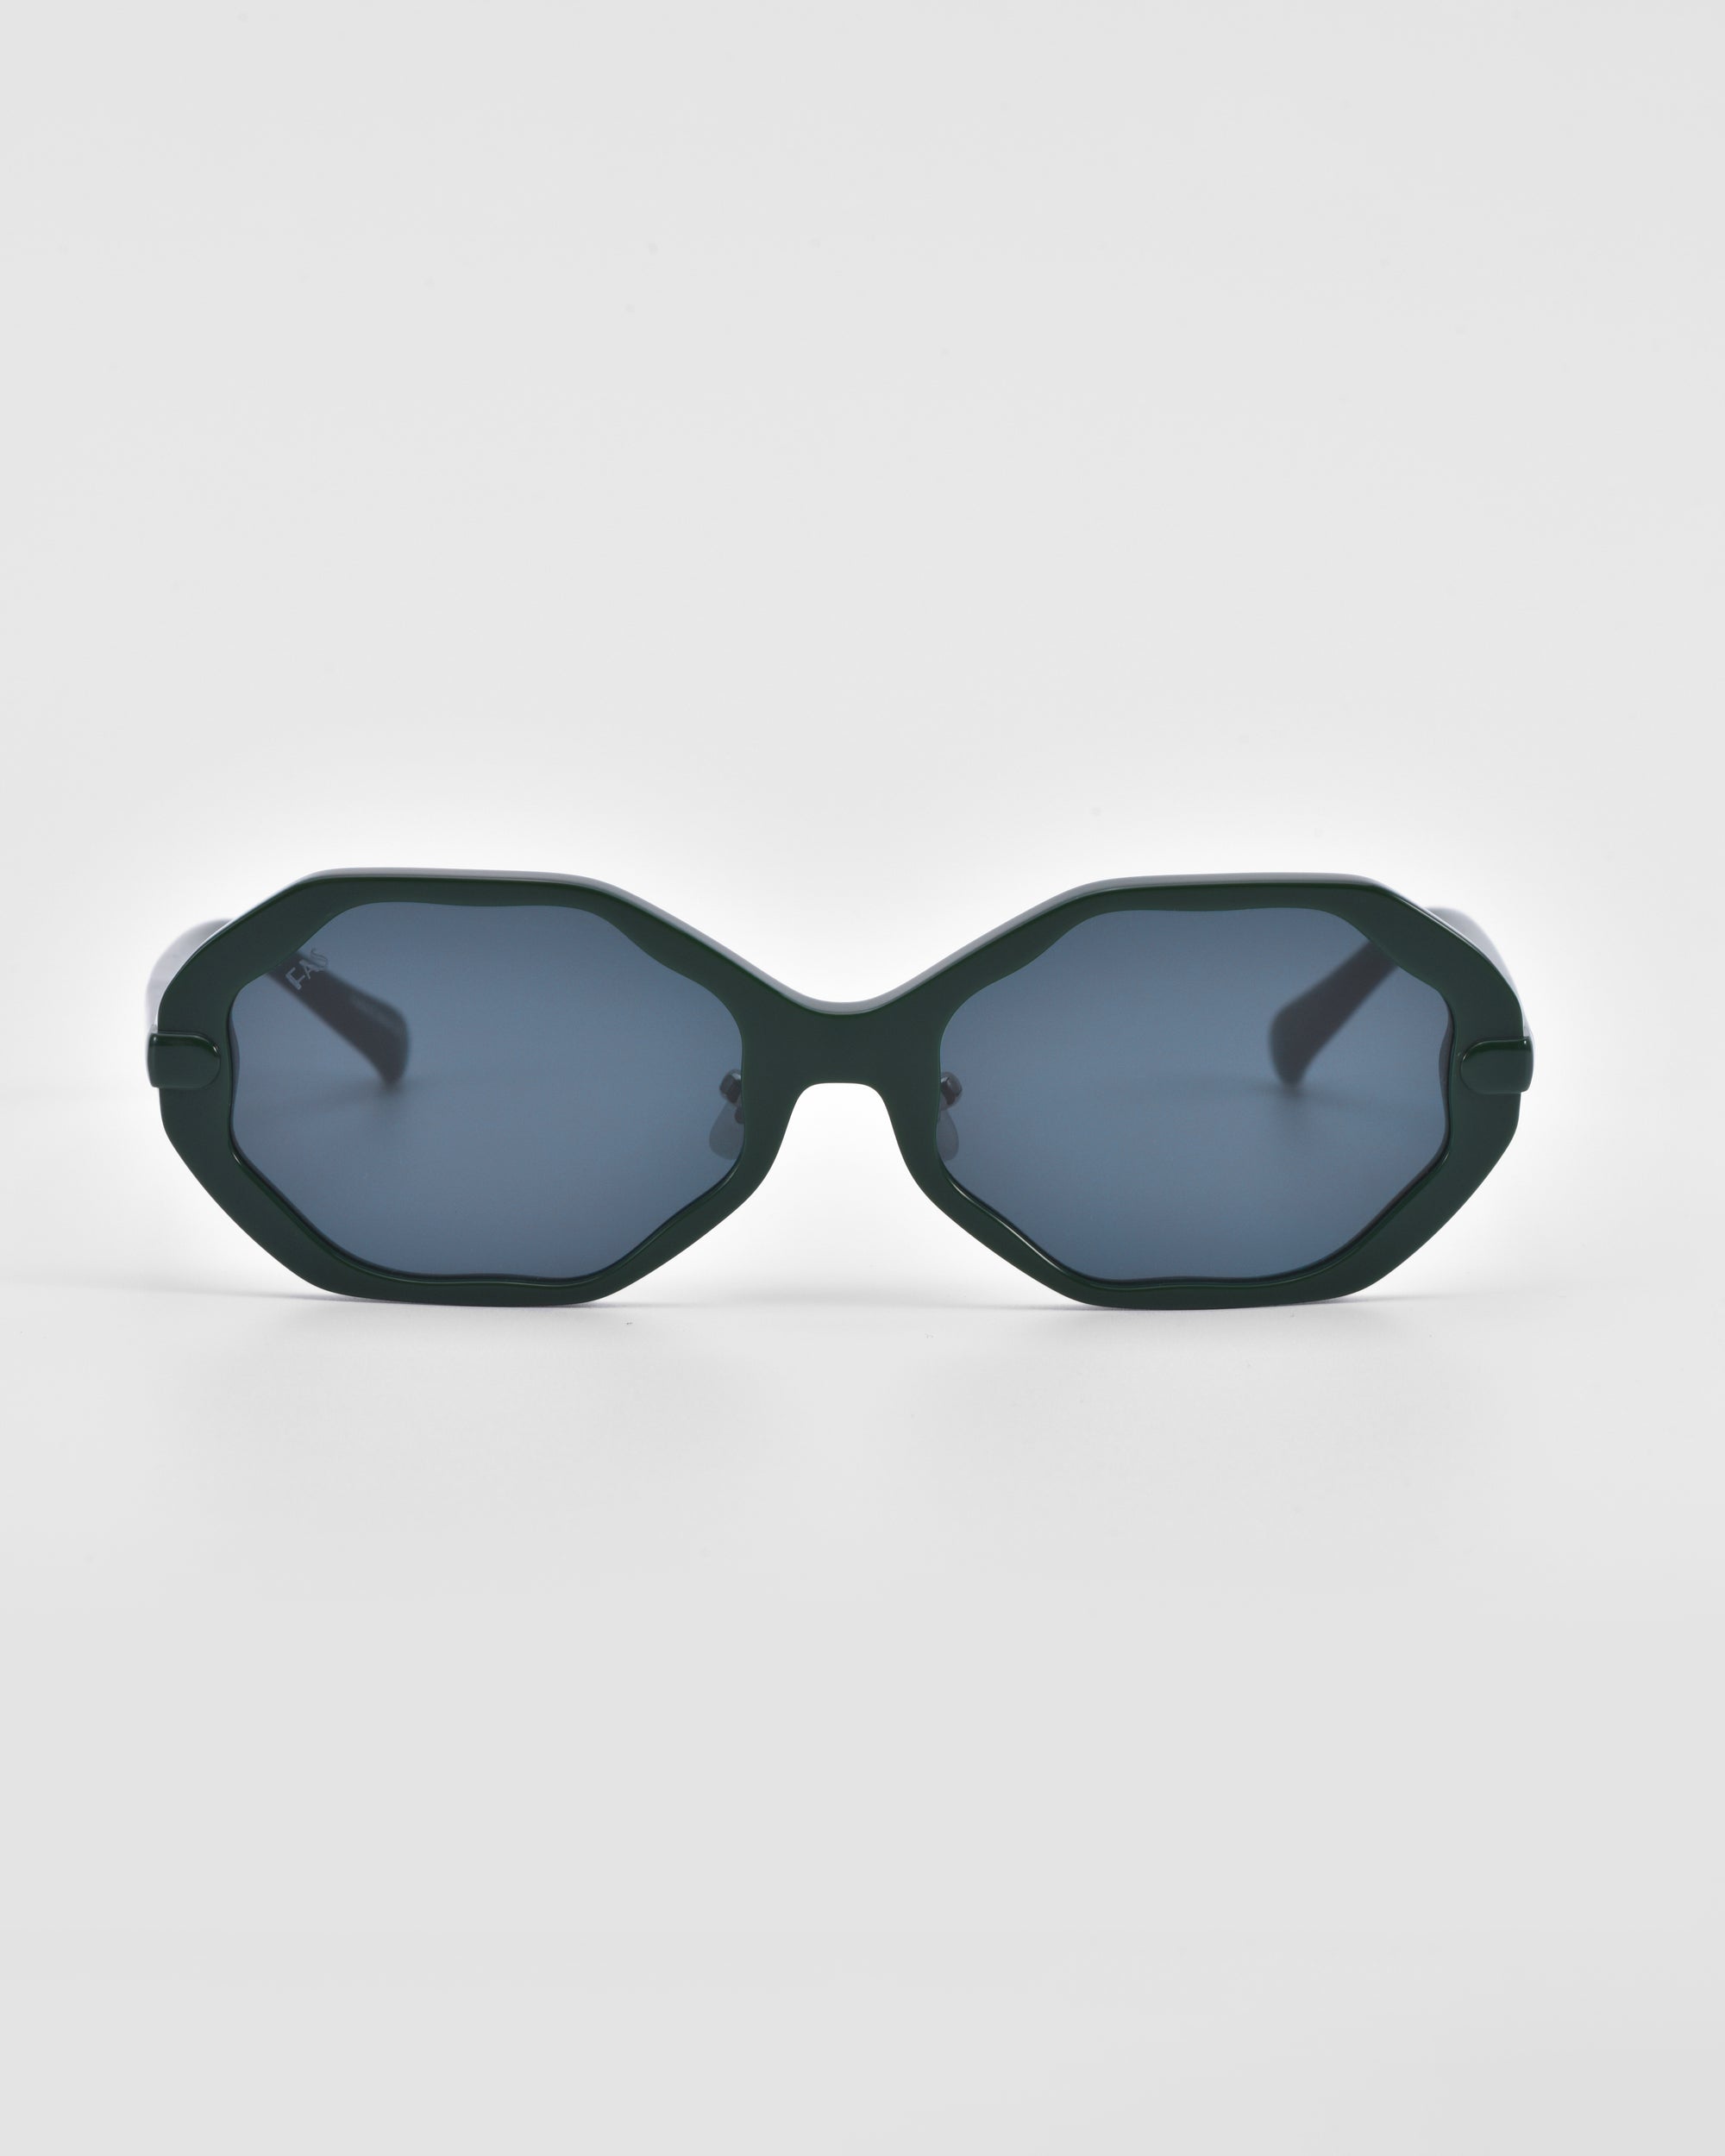 A pair of octagonal, dark green For Art&#39;s Sake® Lotus sunglasses with grey-tinted lenses is centered on a white background. The angular silhouette features a thick frame and jade-stone nose pads, offering a modern geometric design that creates a distinctive, stylish look.